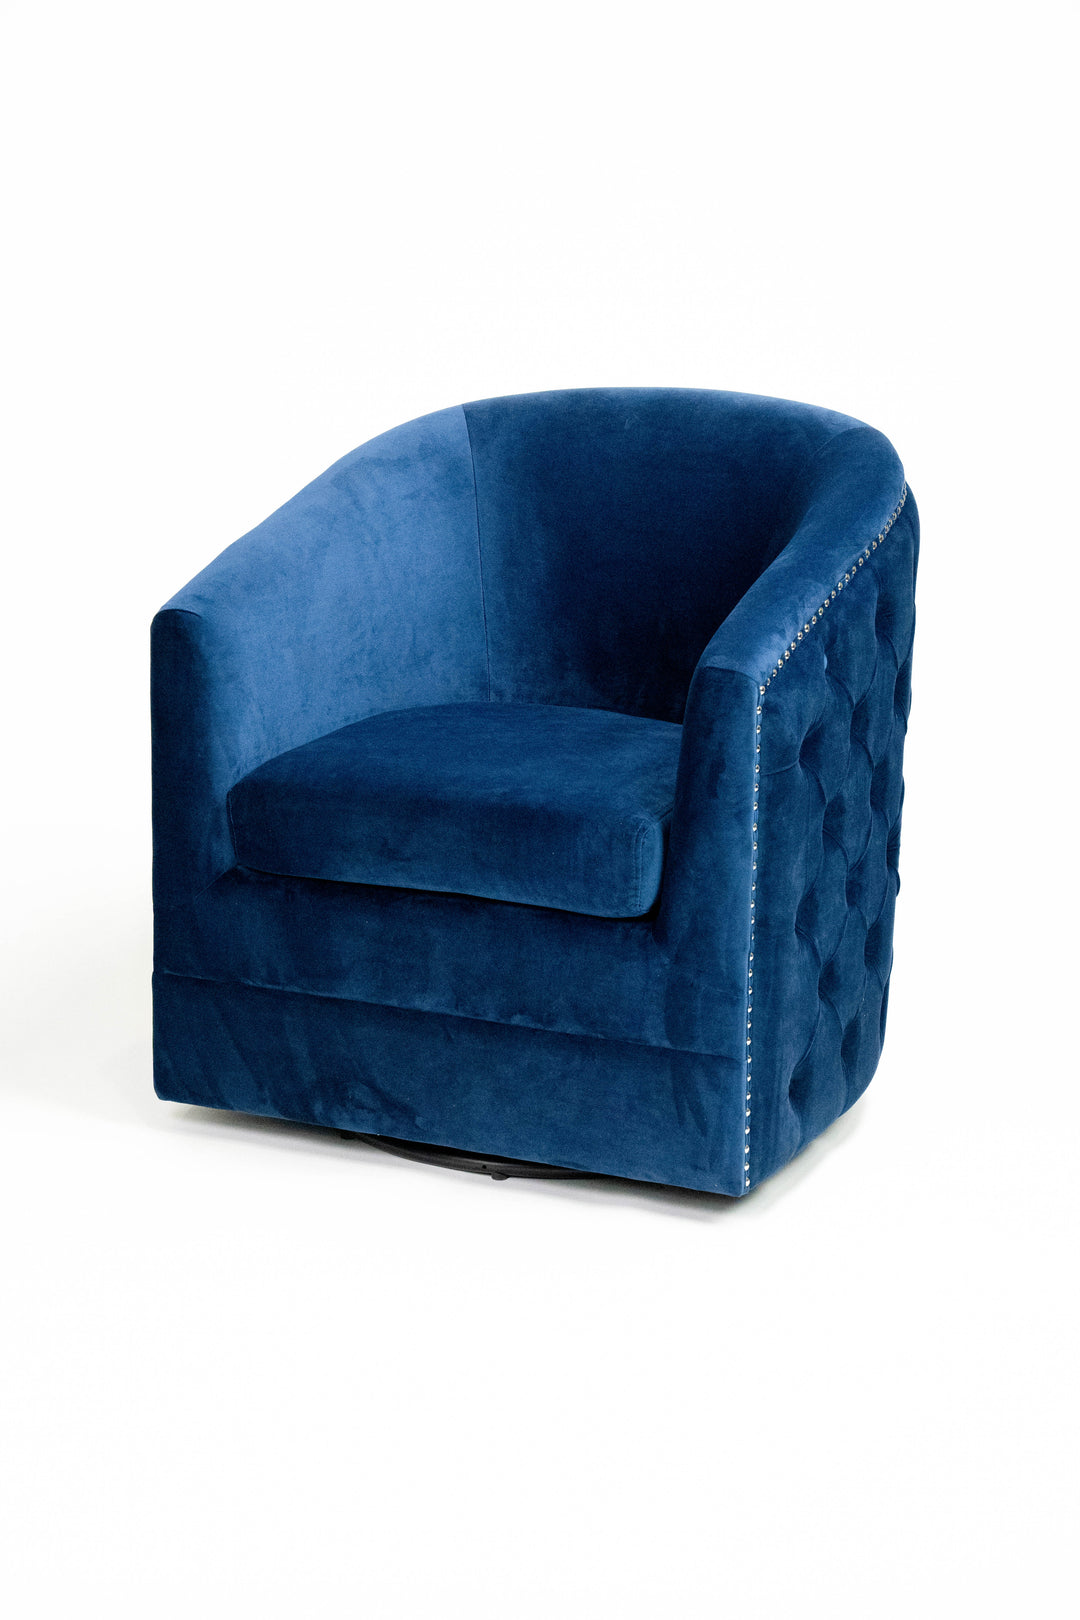 Navy Blue Velvet Chair With  Nailhead Trim, Button-Tufting, And Swivel Base HI-LINE GIFT LTD.